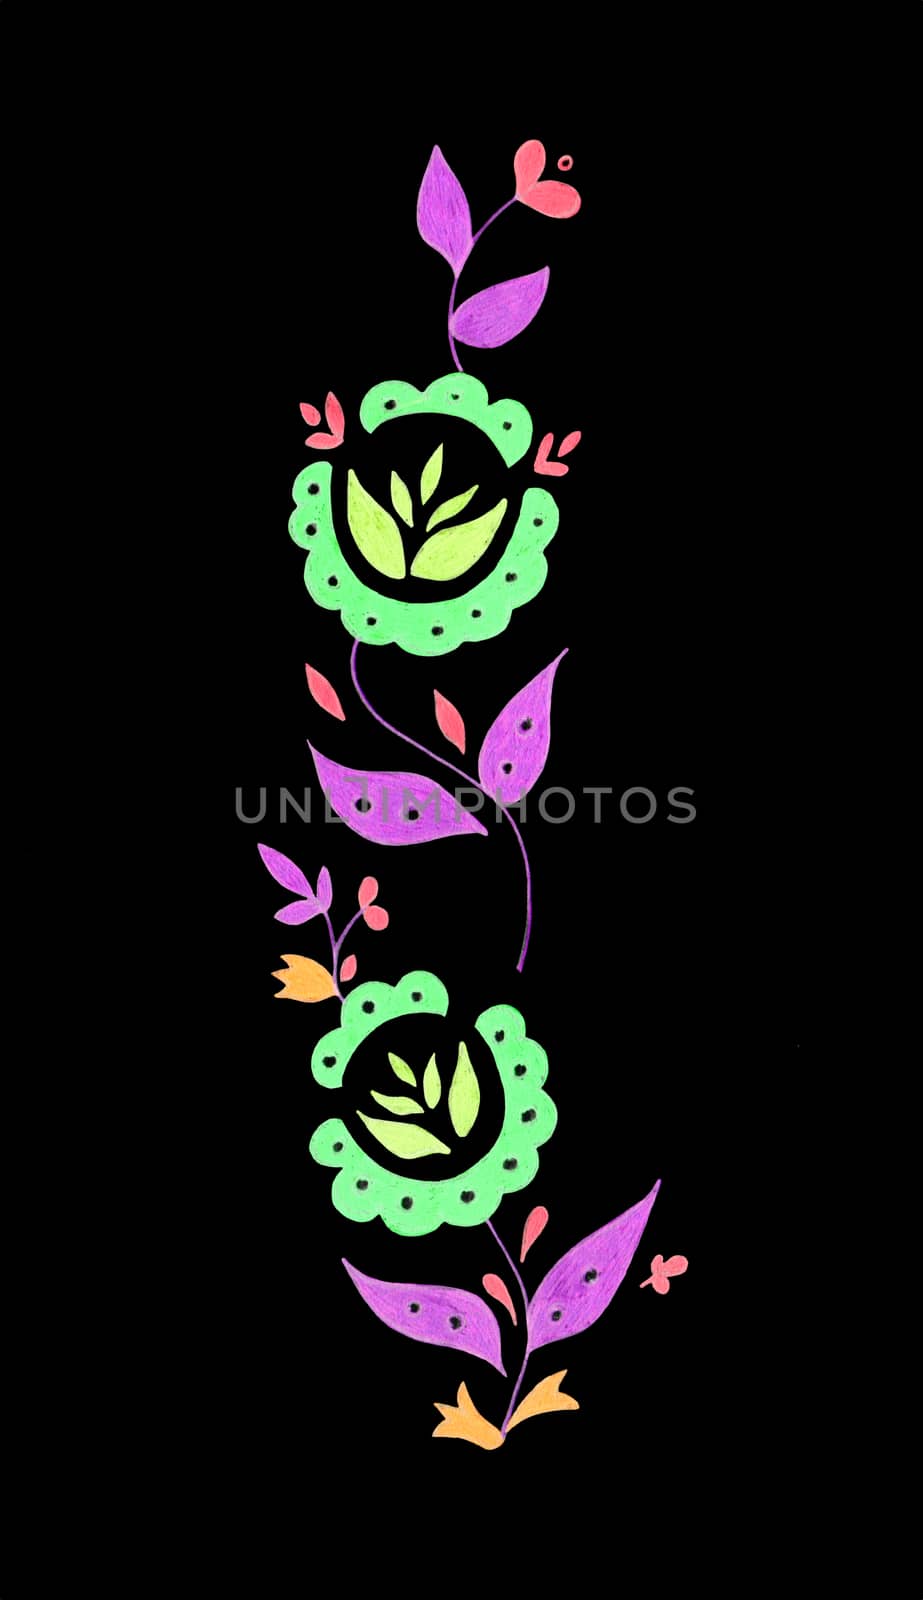 Decorative composition of abstract doodle flowers and leaves. Floral motif illustration. Design element. Hand drawn vertical ornament isolated on white background